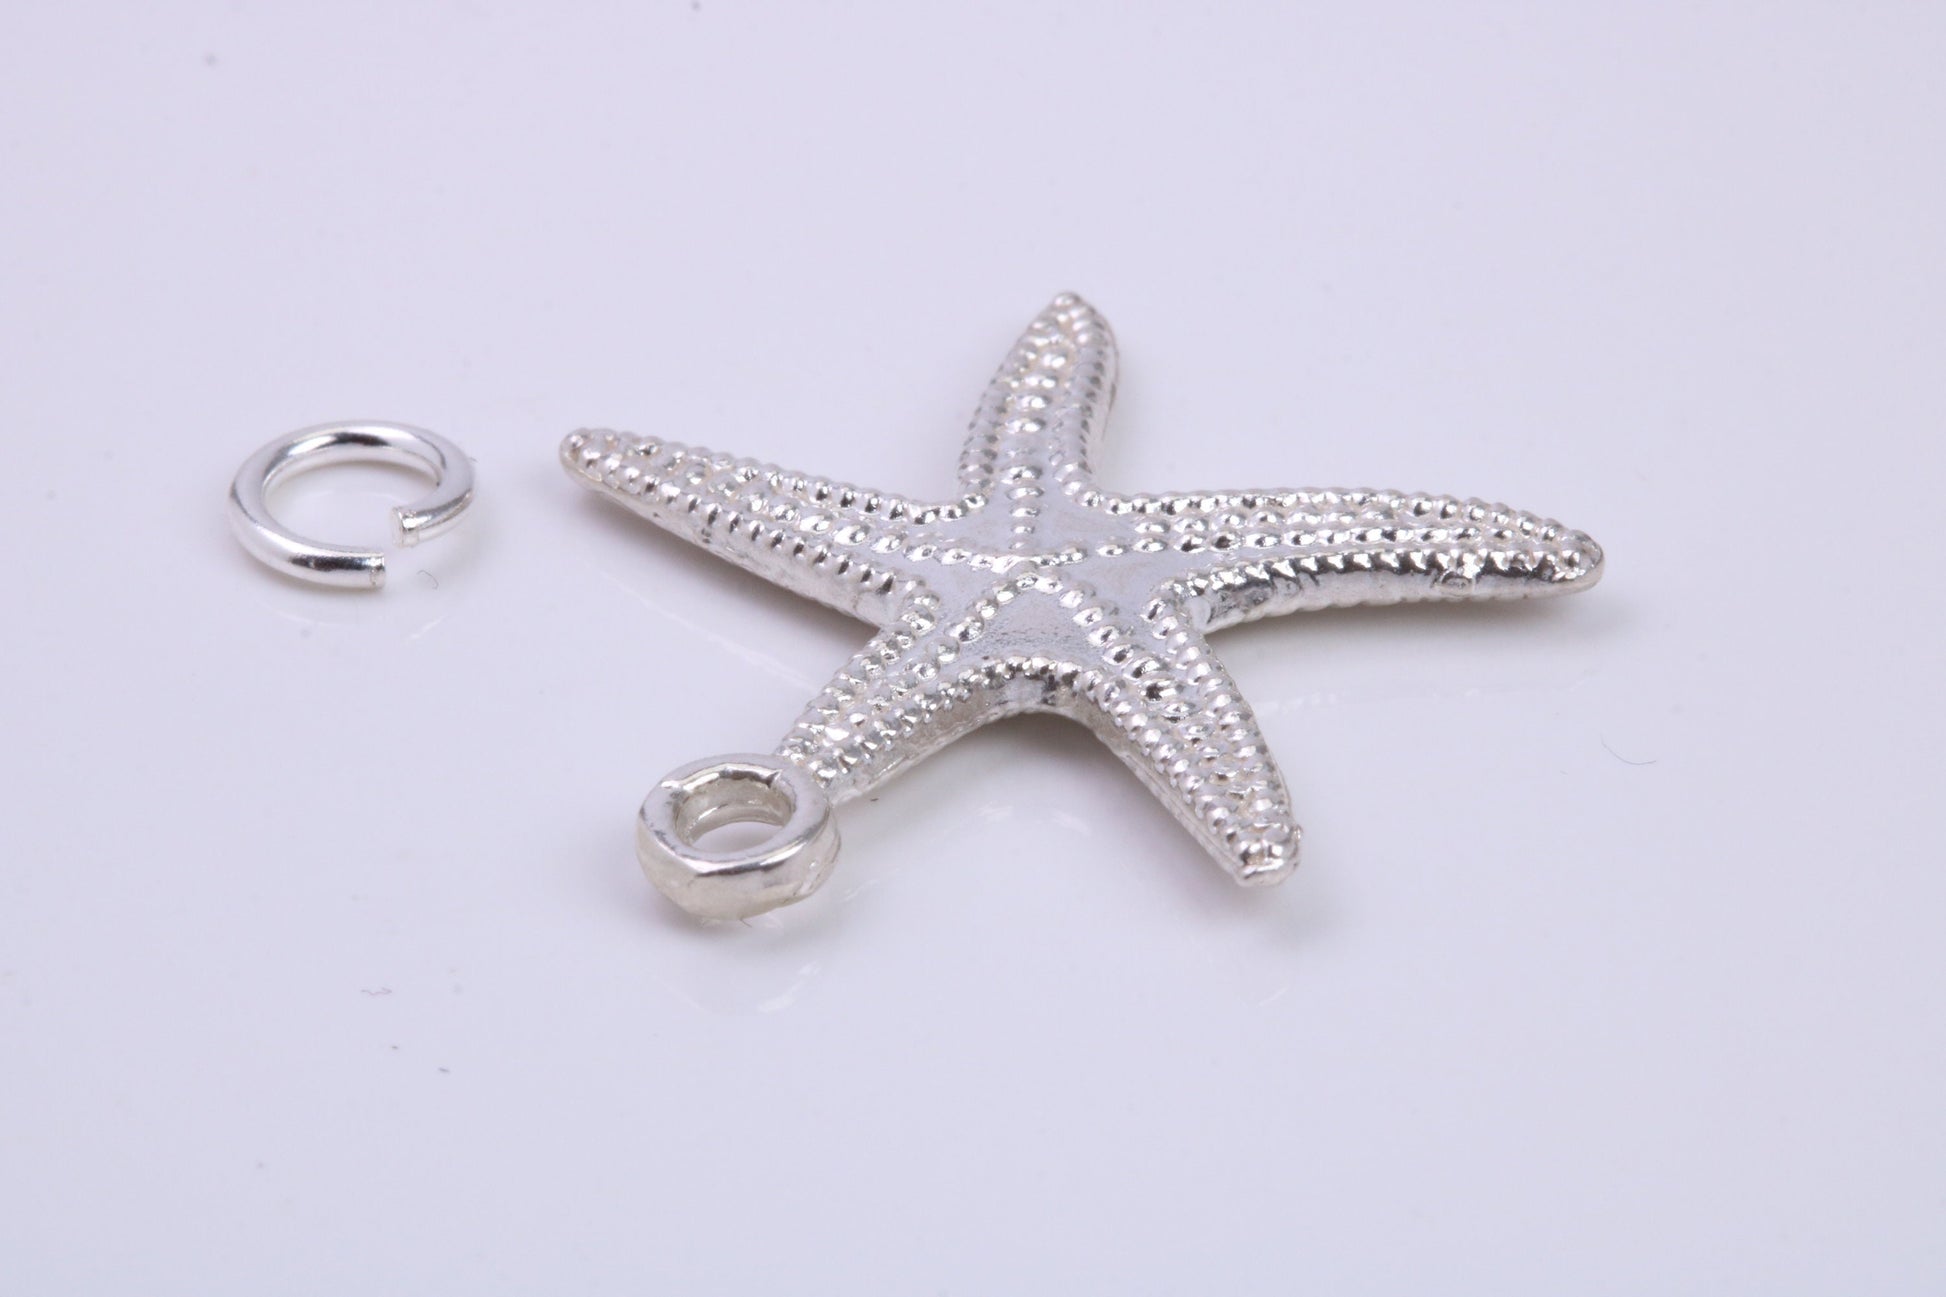 Star Fish Charm, Traditional Charm, Made from Solid 925 Grade Sterling Silver, Complete with Attachment Link